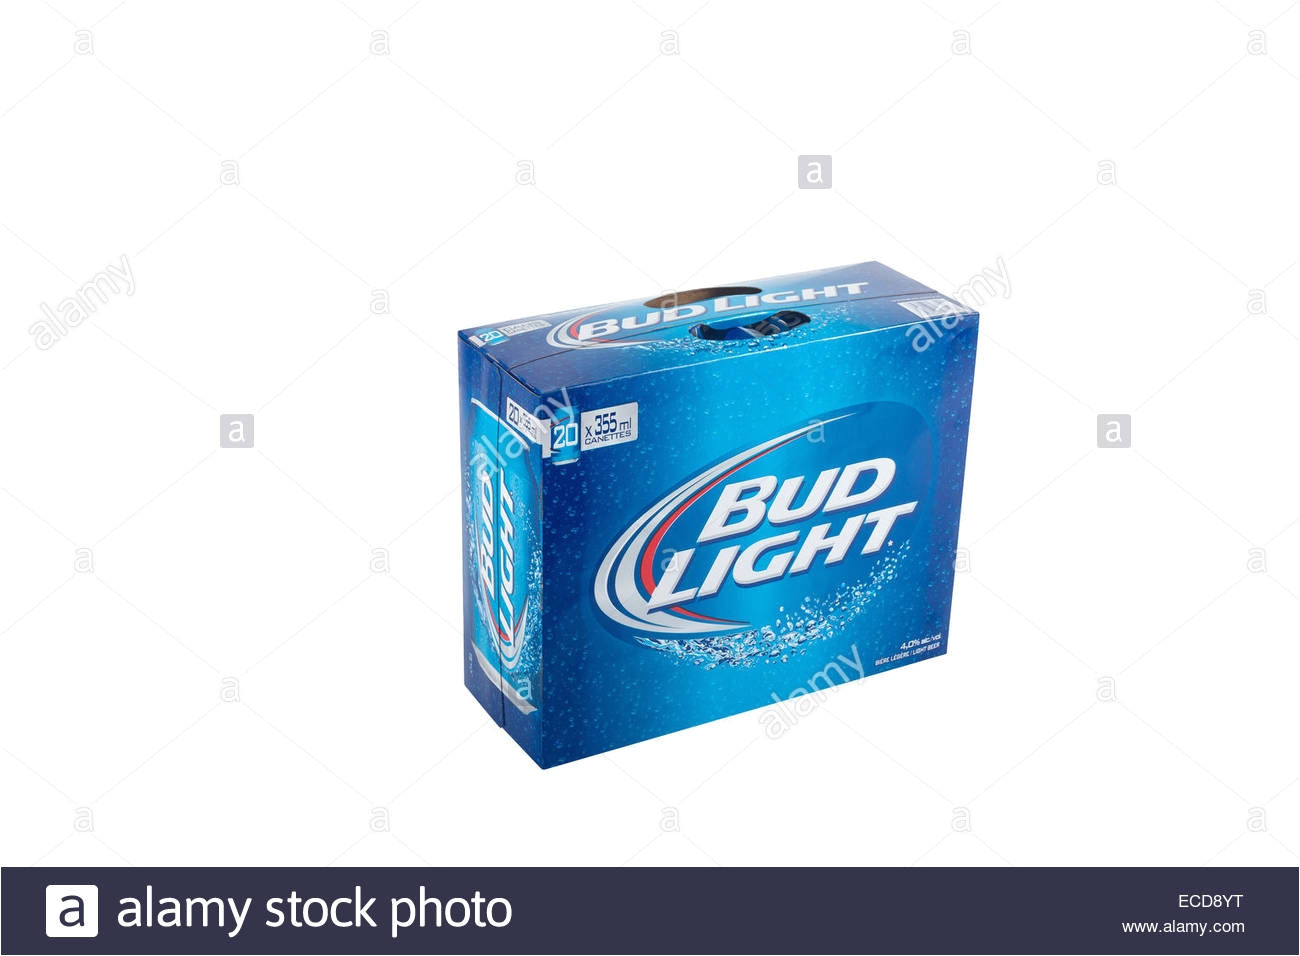 a pack of 20 355ml cans of bud light beer is pictured over a pure white